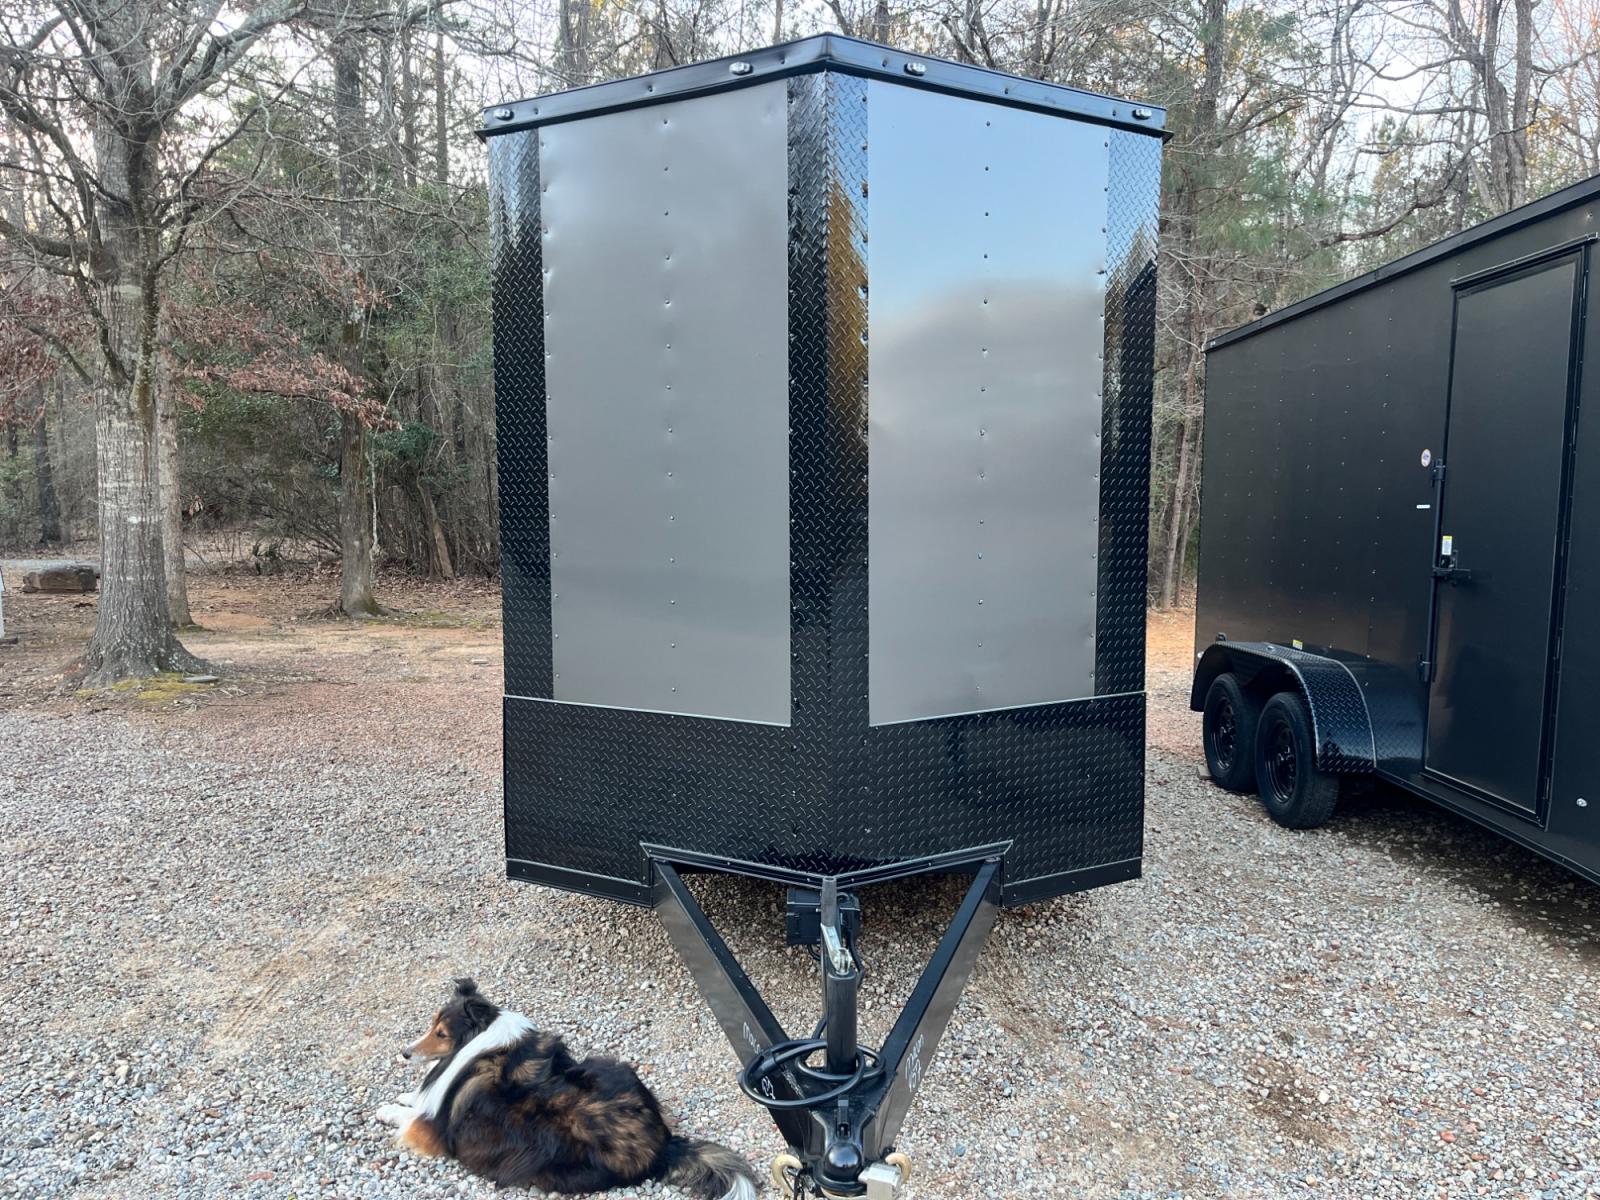 2023 .080 Charcoal Metallic w/Black Out Pkg. Elite Cargo 7ft X 14ft Tandem , located at 1330 Rainey Rd., Macon, 31220, (478) 960-1044, 32.845638, -83.778687 - Brand New 2023 "Top of the Line" Elite Cargo Brand Trailer Made in South Ga. Awesome 7ft X 14ft Tandem Enclosed Cycle Hauler & Cargo Trailer! Taller Inside Height is 7ft 6" Tall Inside & Ramp Door Clearance is 7ft! .080 Thick Metallic Charcoal Aluminum Skin is Awesome! Black Out Pkg Trim, Wider - Photo #7